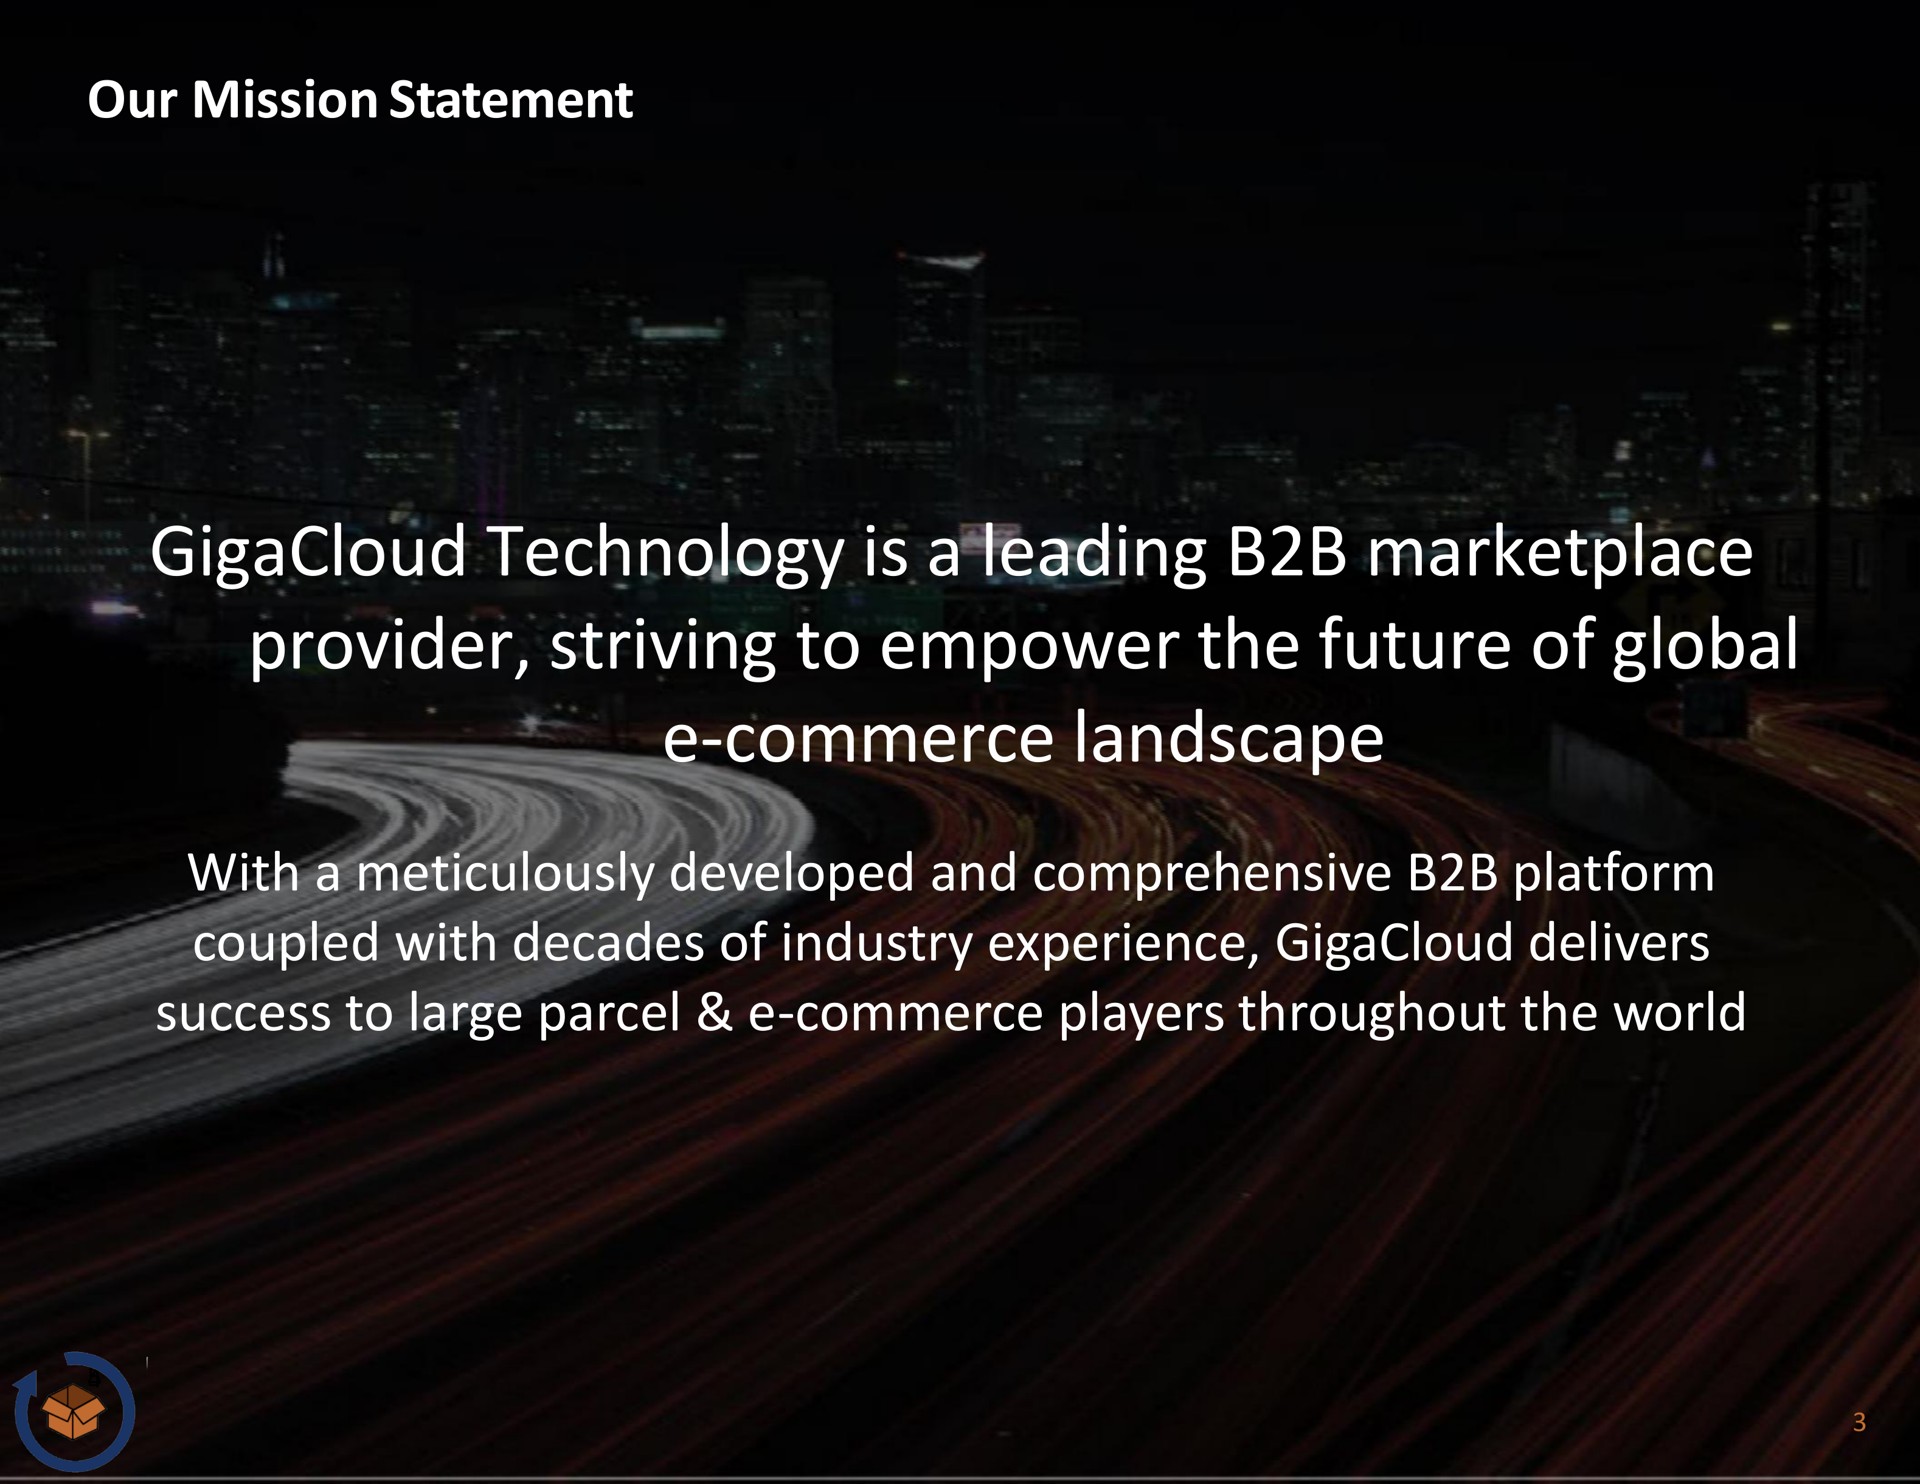 our mission statement technology is a leading provider striving to empower the future of global commerce landscape with a meticulously developed and comprehensive platform coupled with decades of industry experience delivers success to large parcel commerce players throughout the world with a | GigaCloud Technology